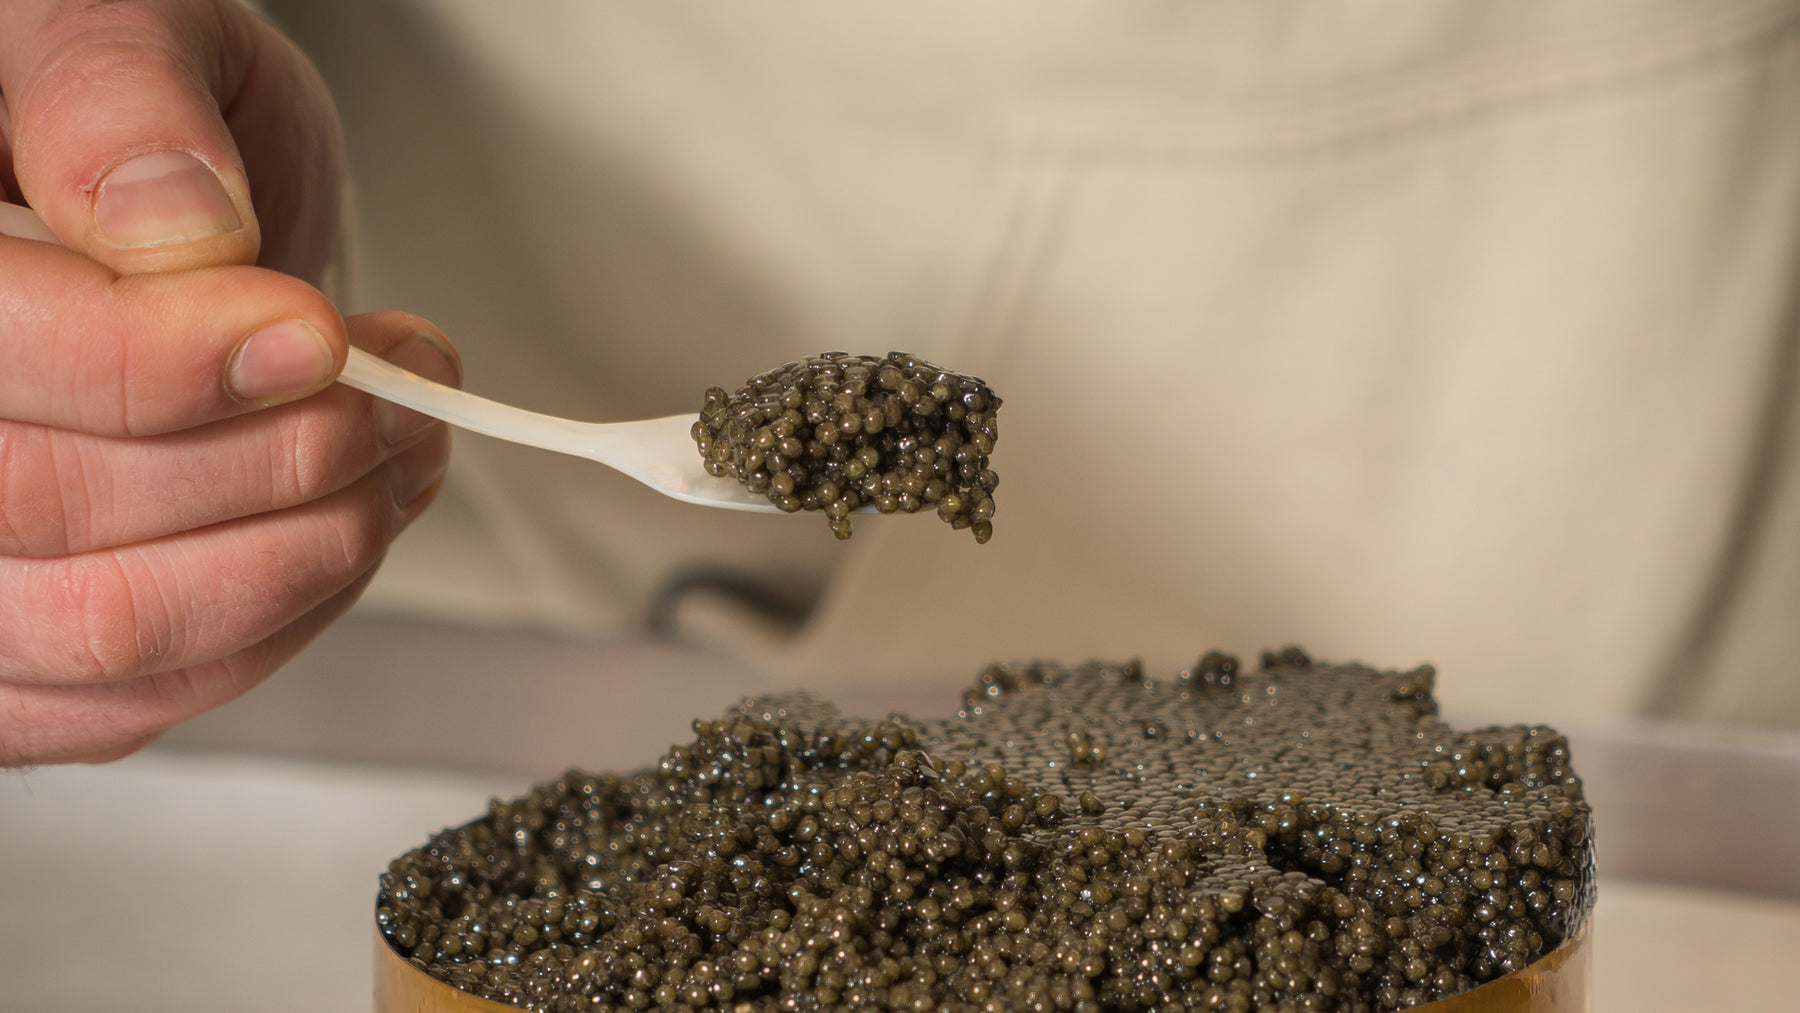 What Are the Health Benefits of Caviar?